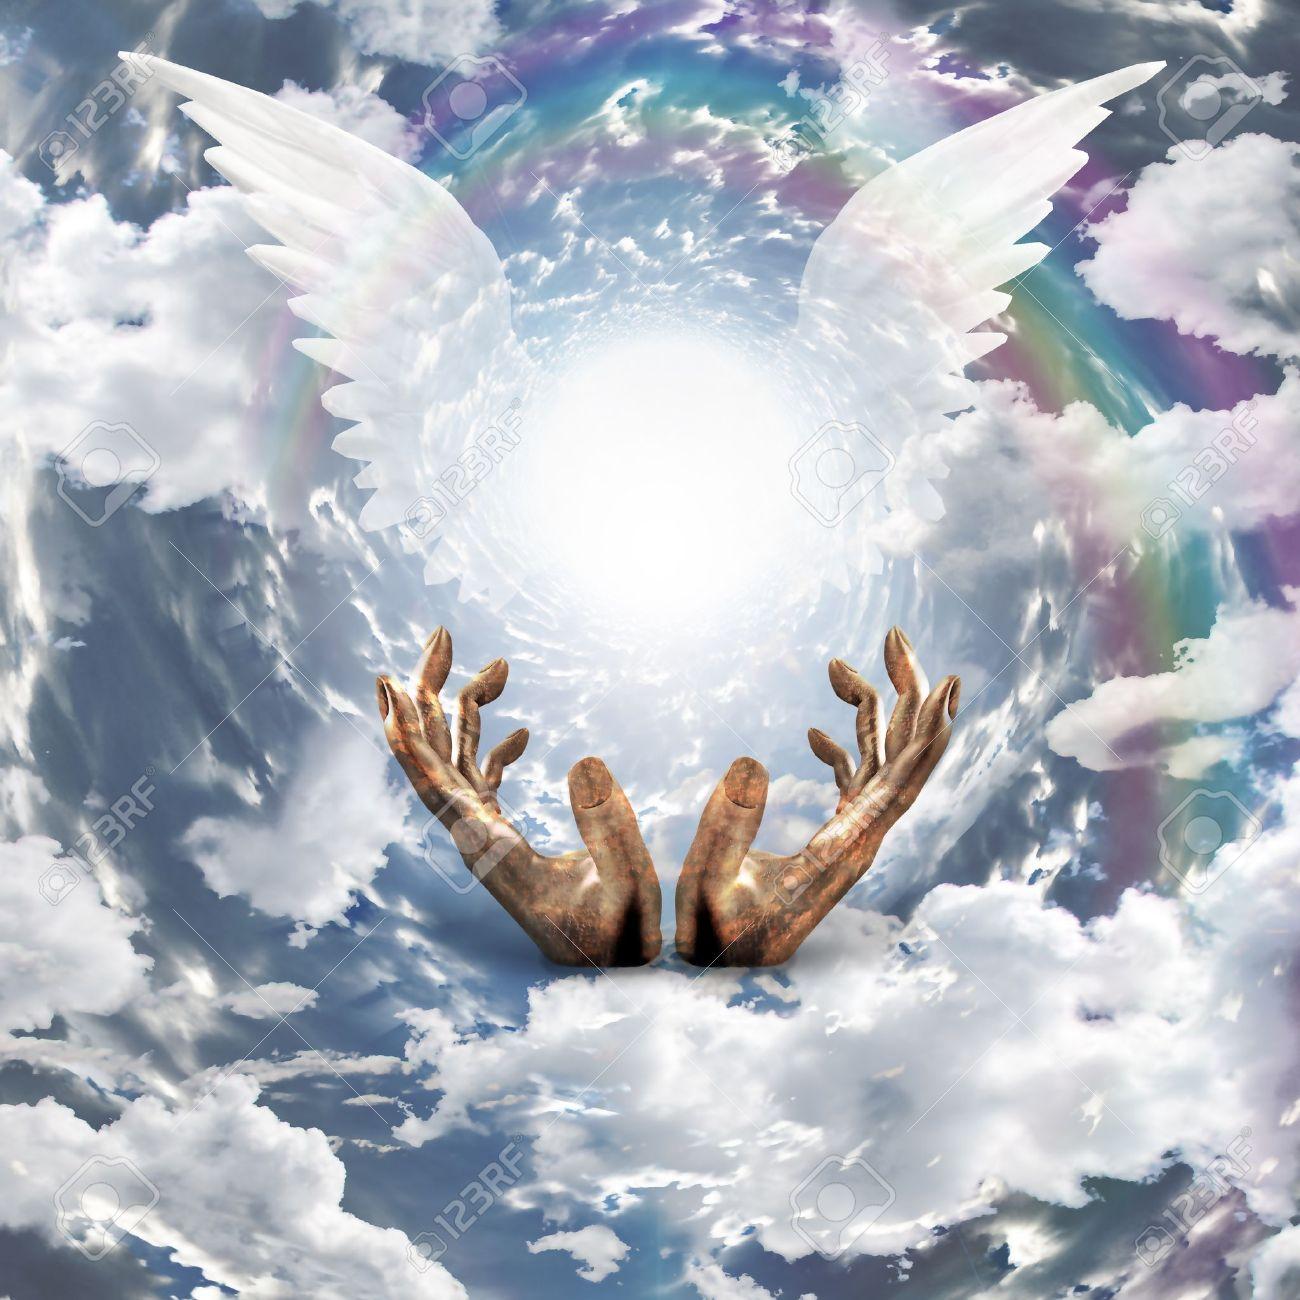 Heaven With Angels Background Carrotapp